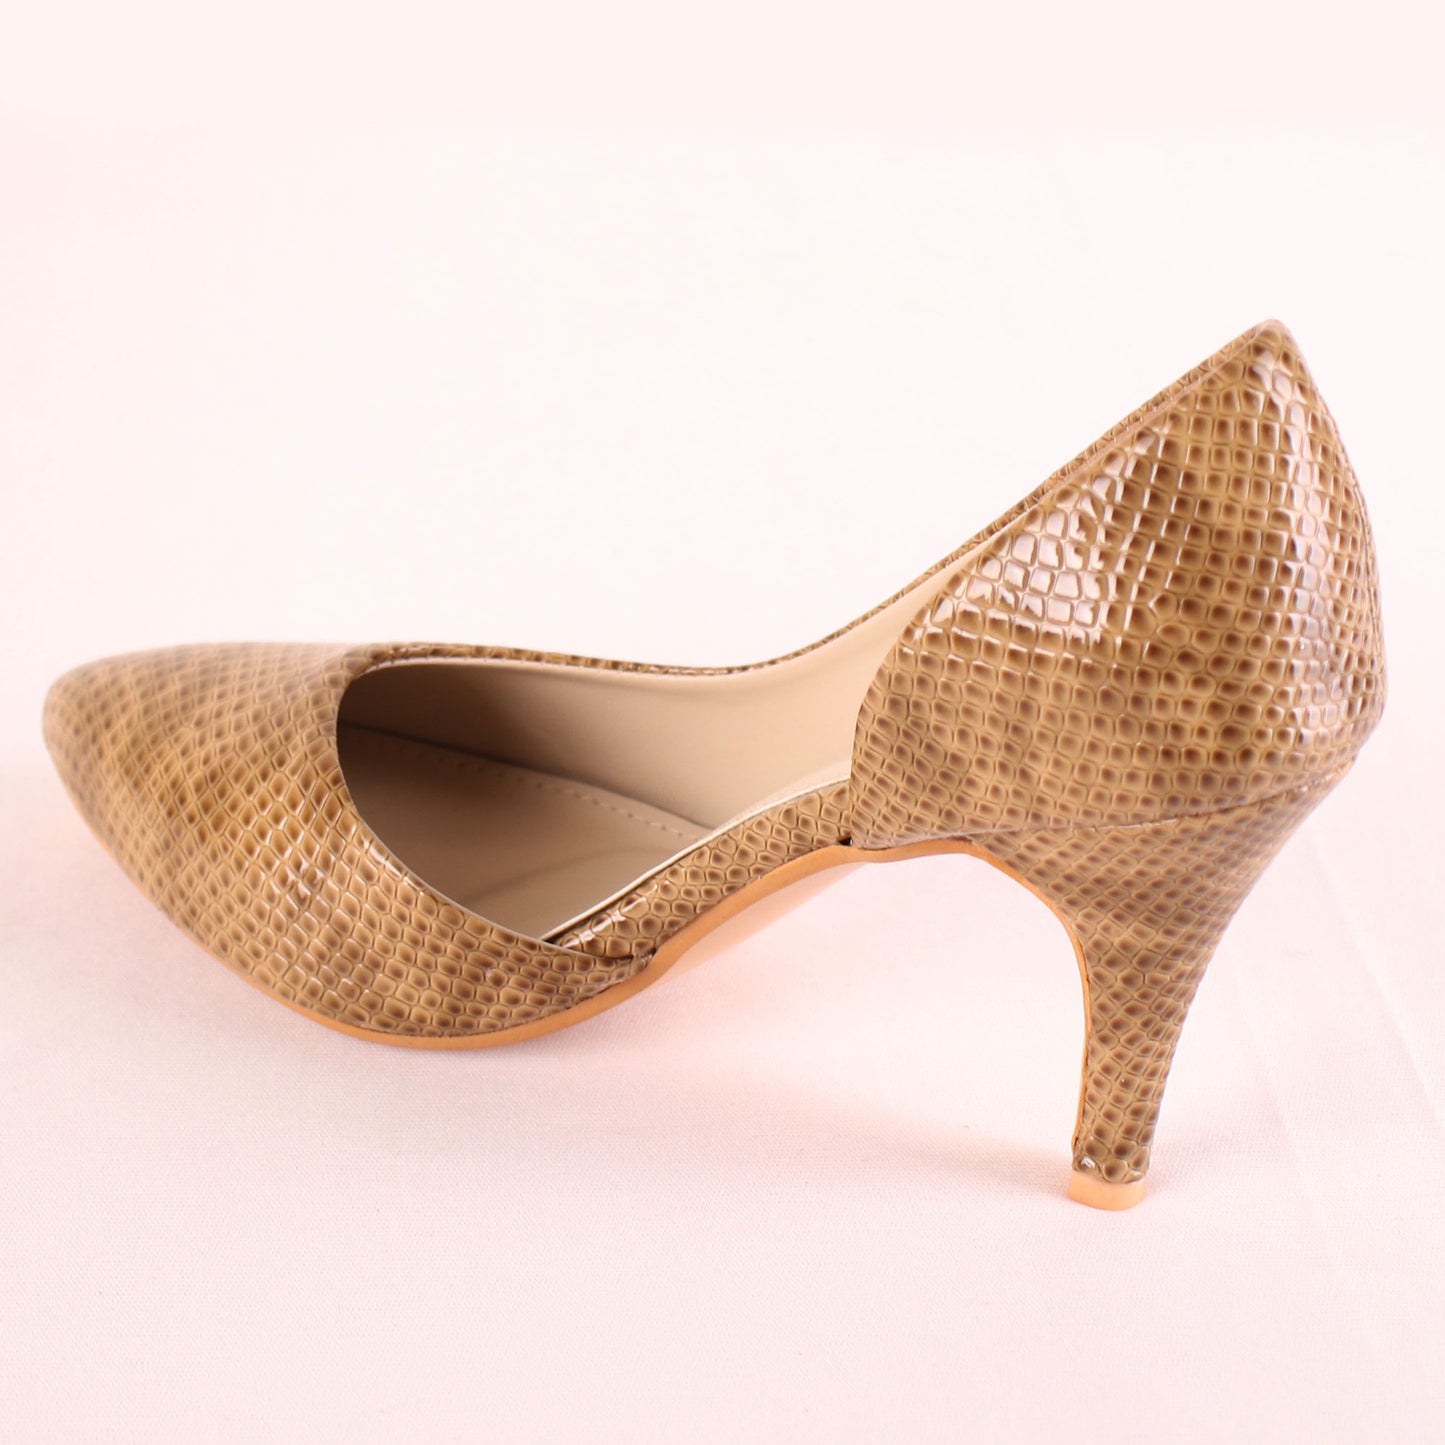 Foot Wear,The Awe-inspiring Snake Printed D'Orsay Pumps in Pale Green - Cippele Multi Store